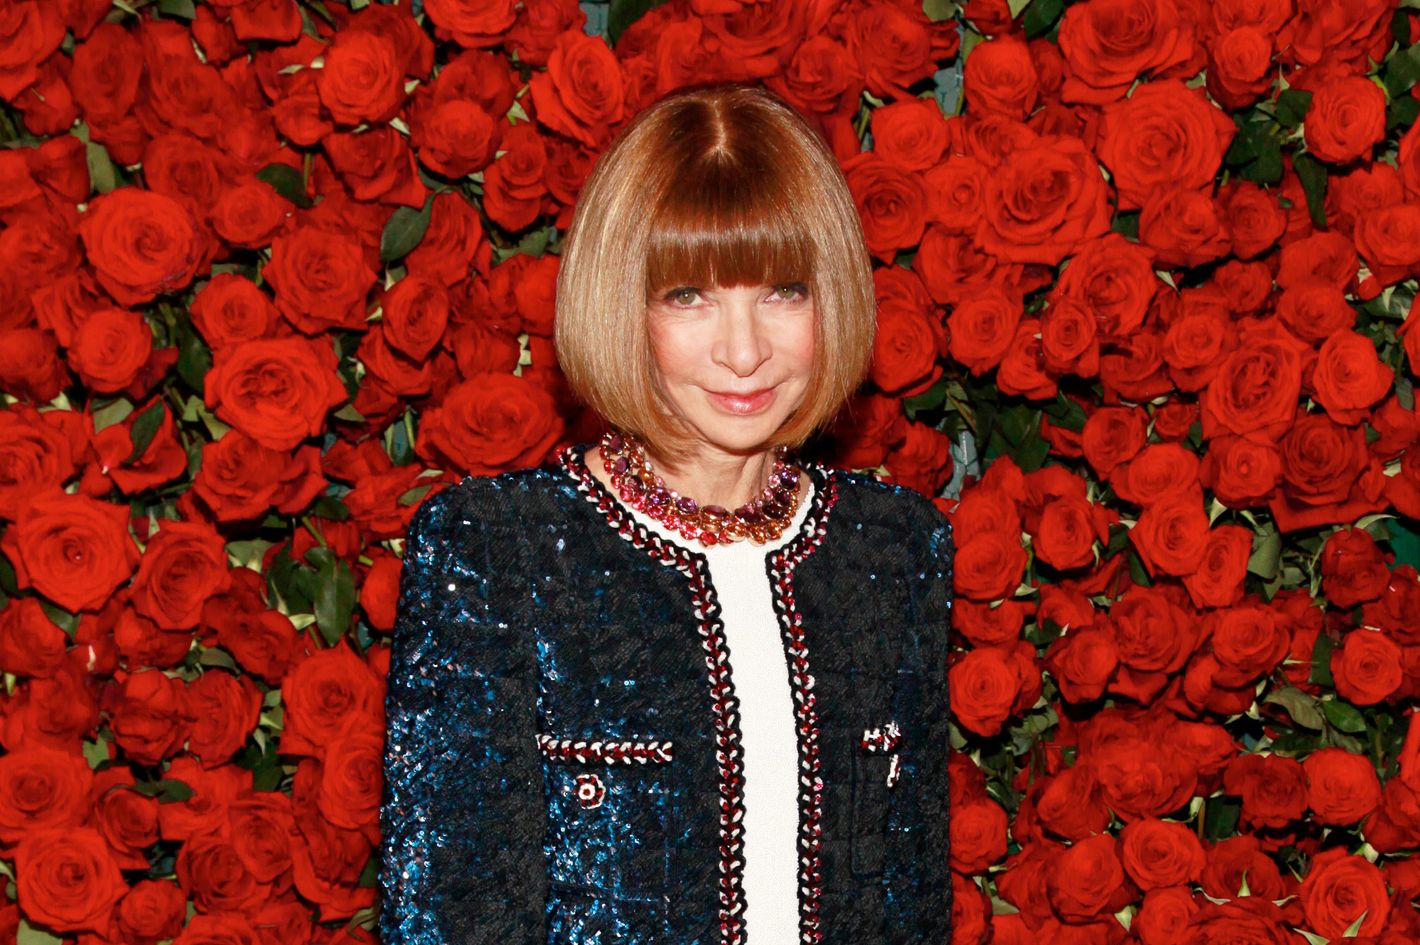 Anna Wintour attending the Louis Vuitton Ready to Wear Spring